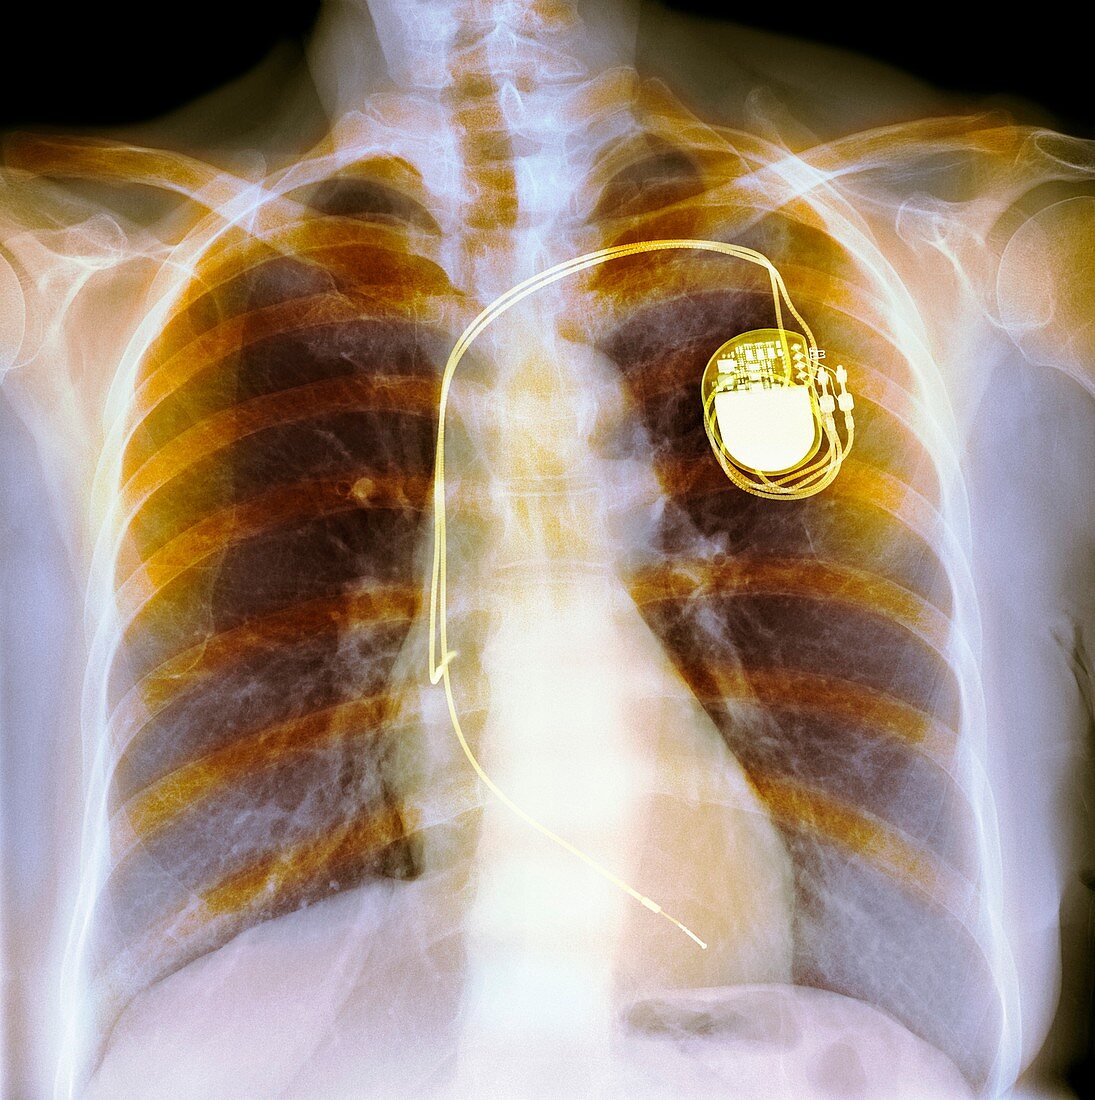 Dual chamber pacemaker,X-ray